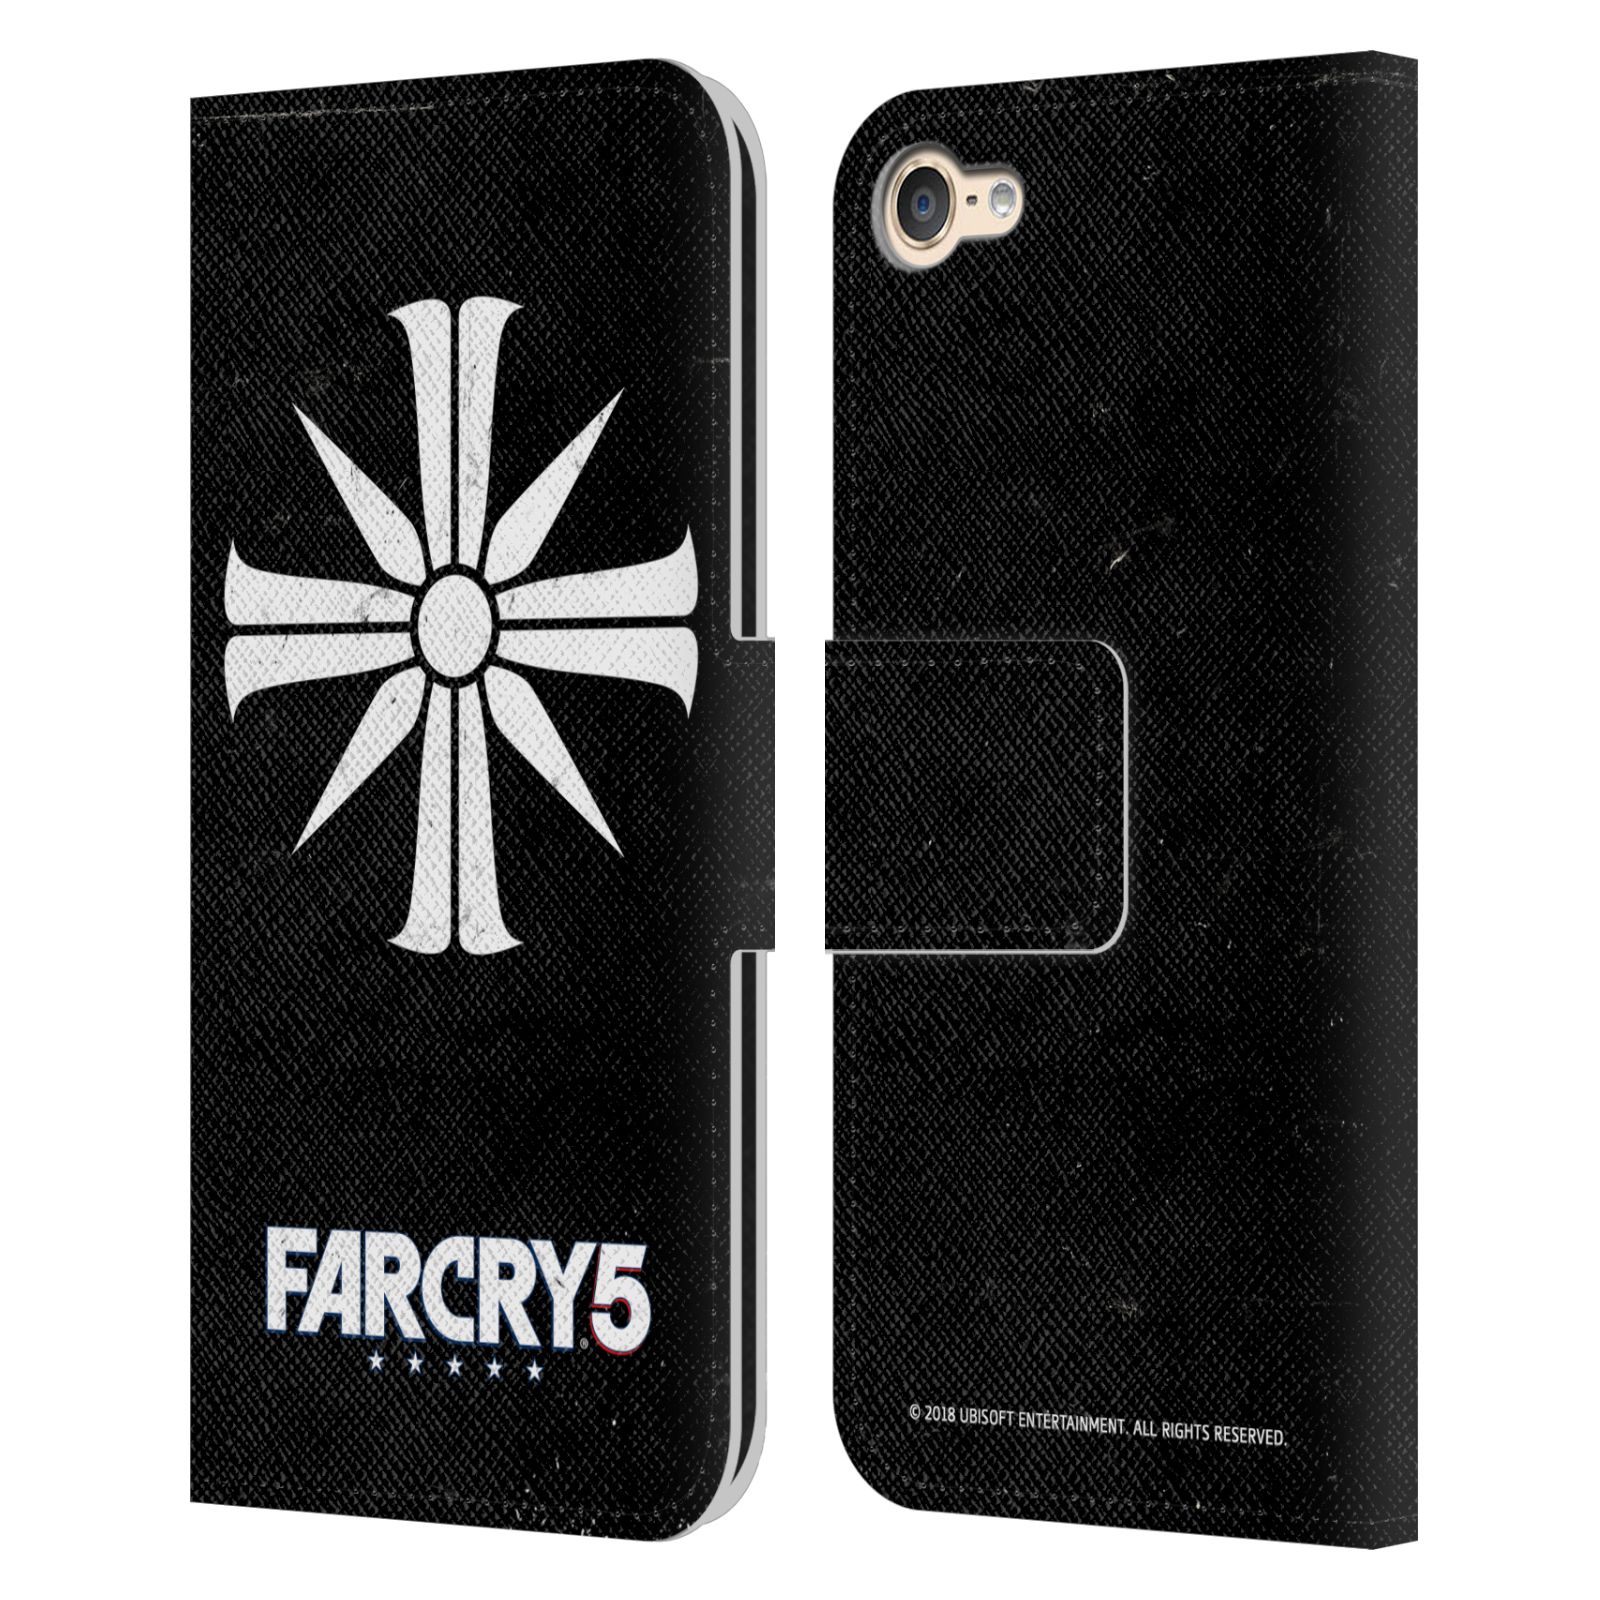 official-far-cry-5-key-art-and-logo-leather-book-case-for-apple-ipod